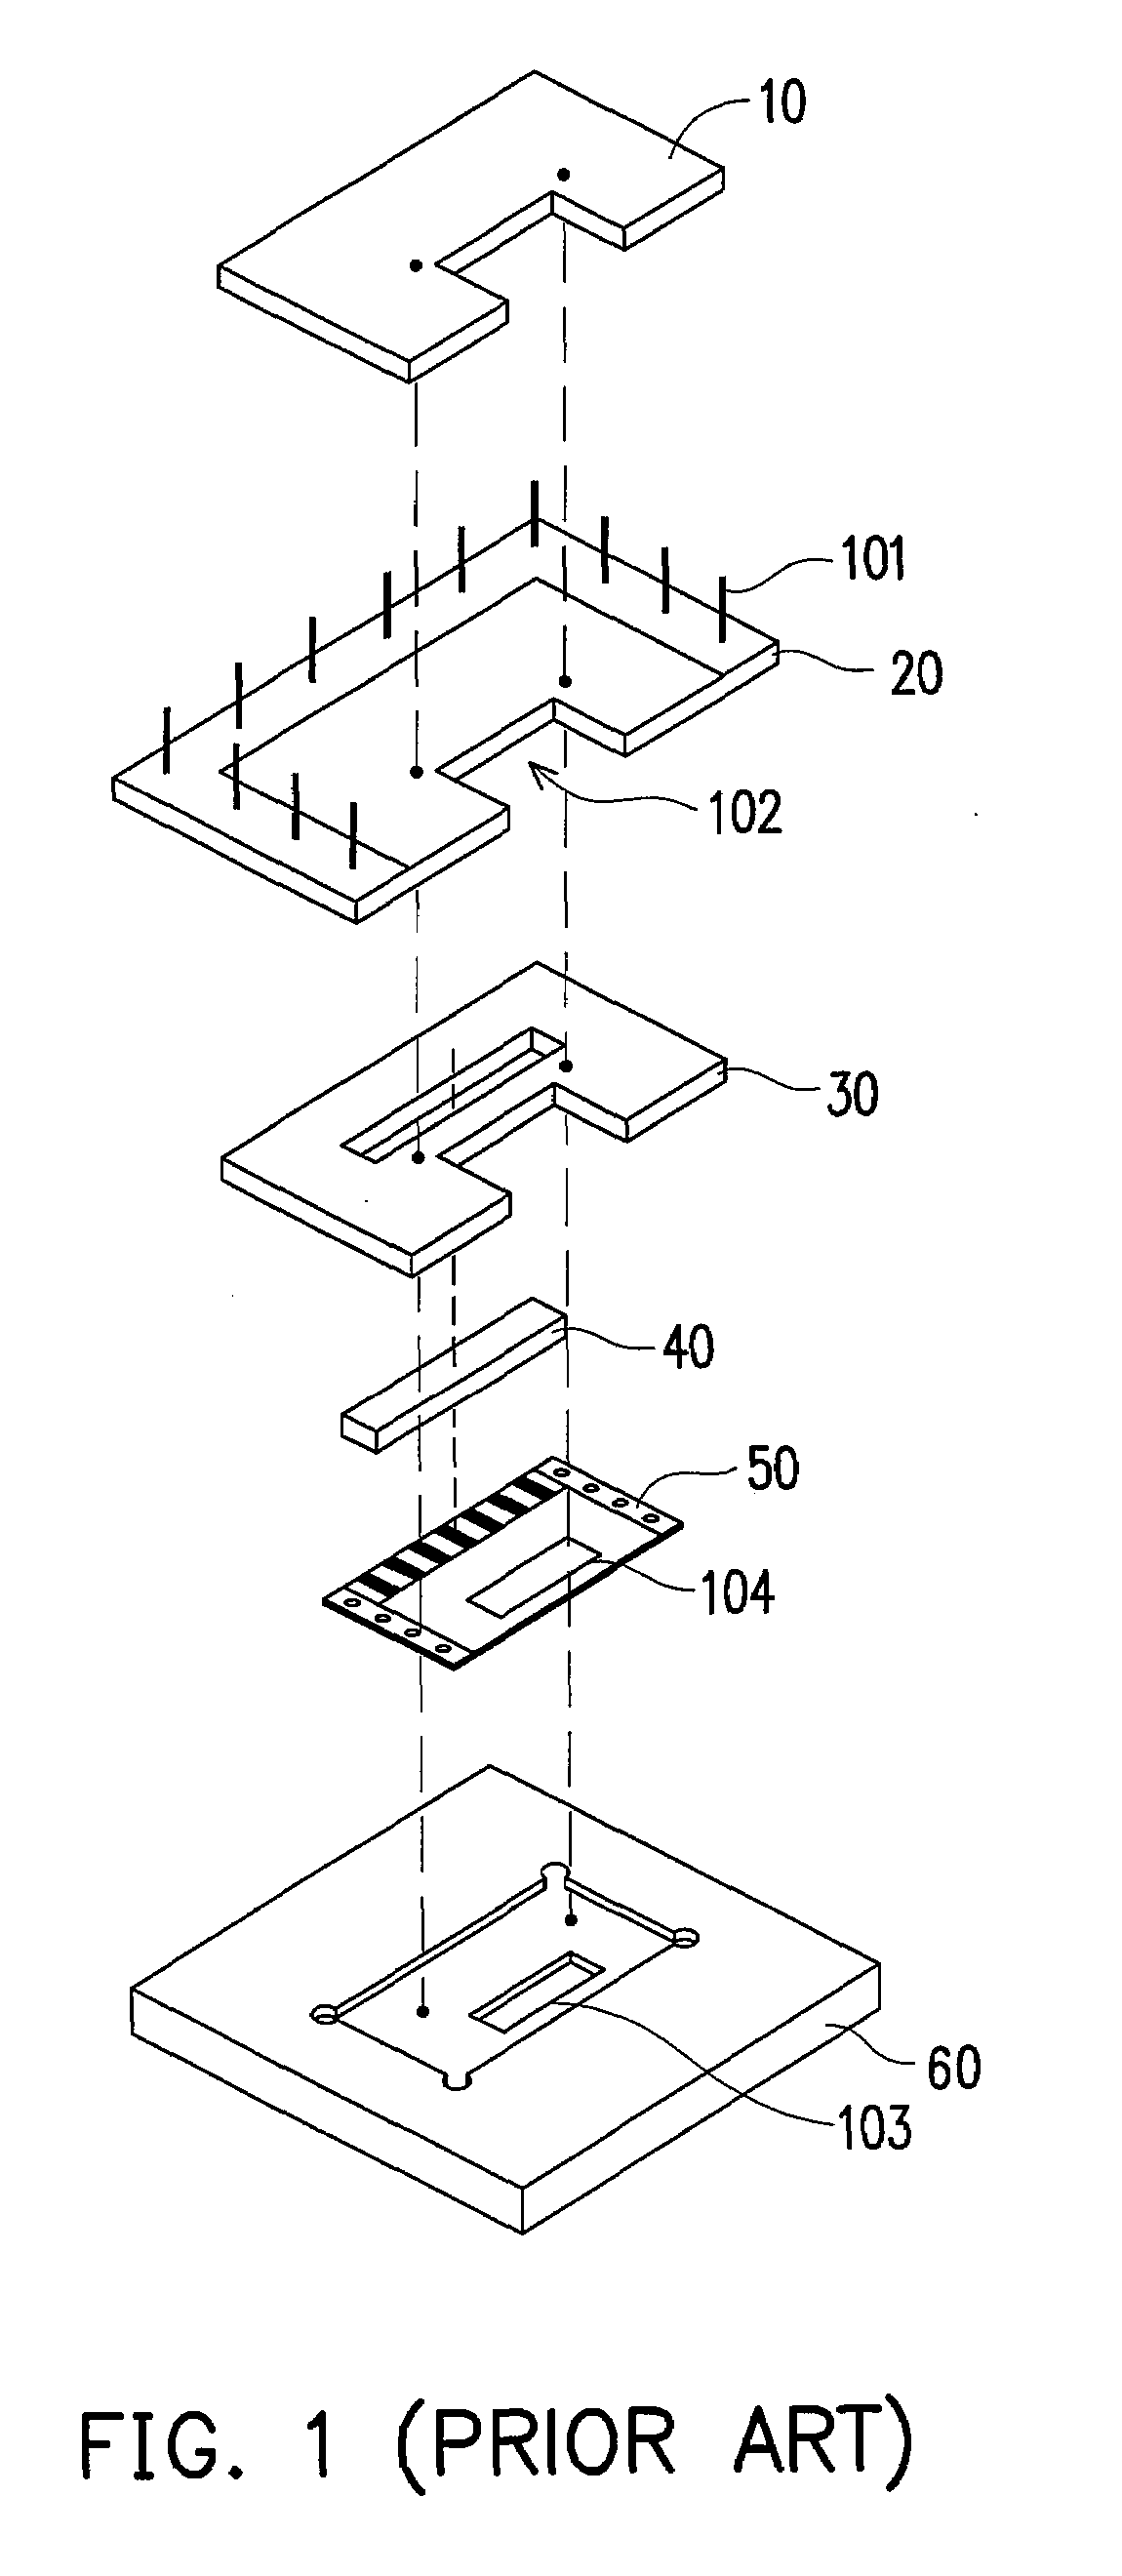 Fixture for analyzing thin flexible electronic device